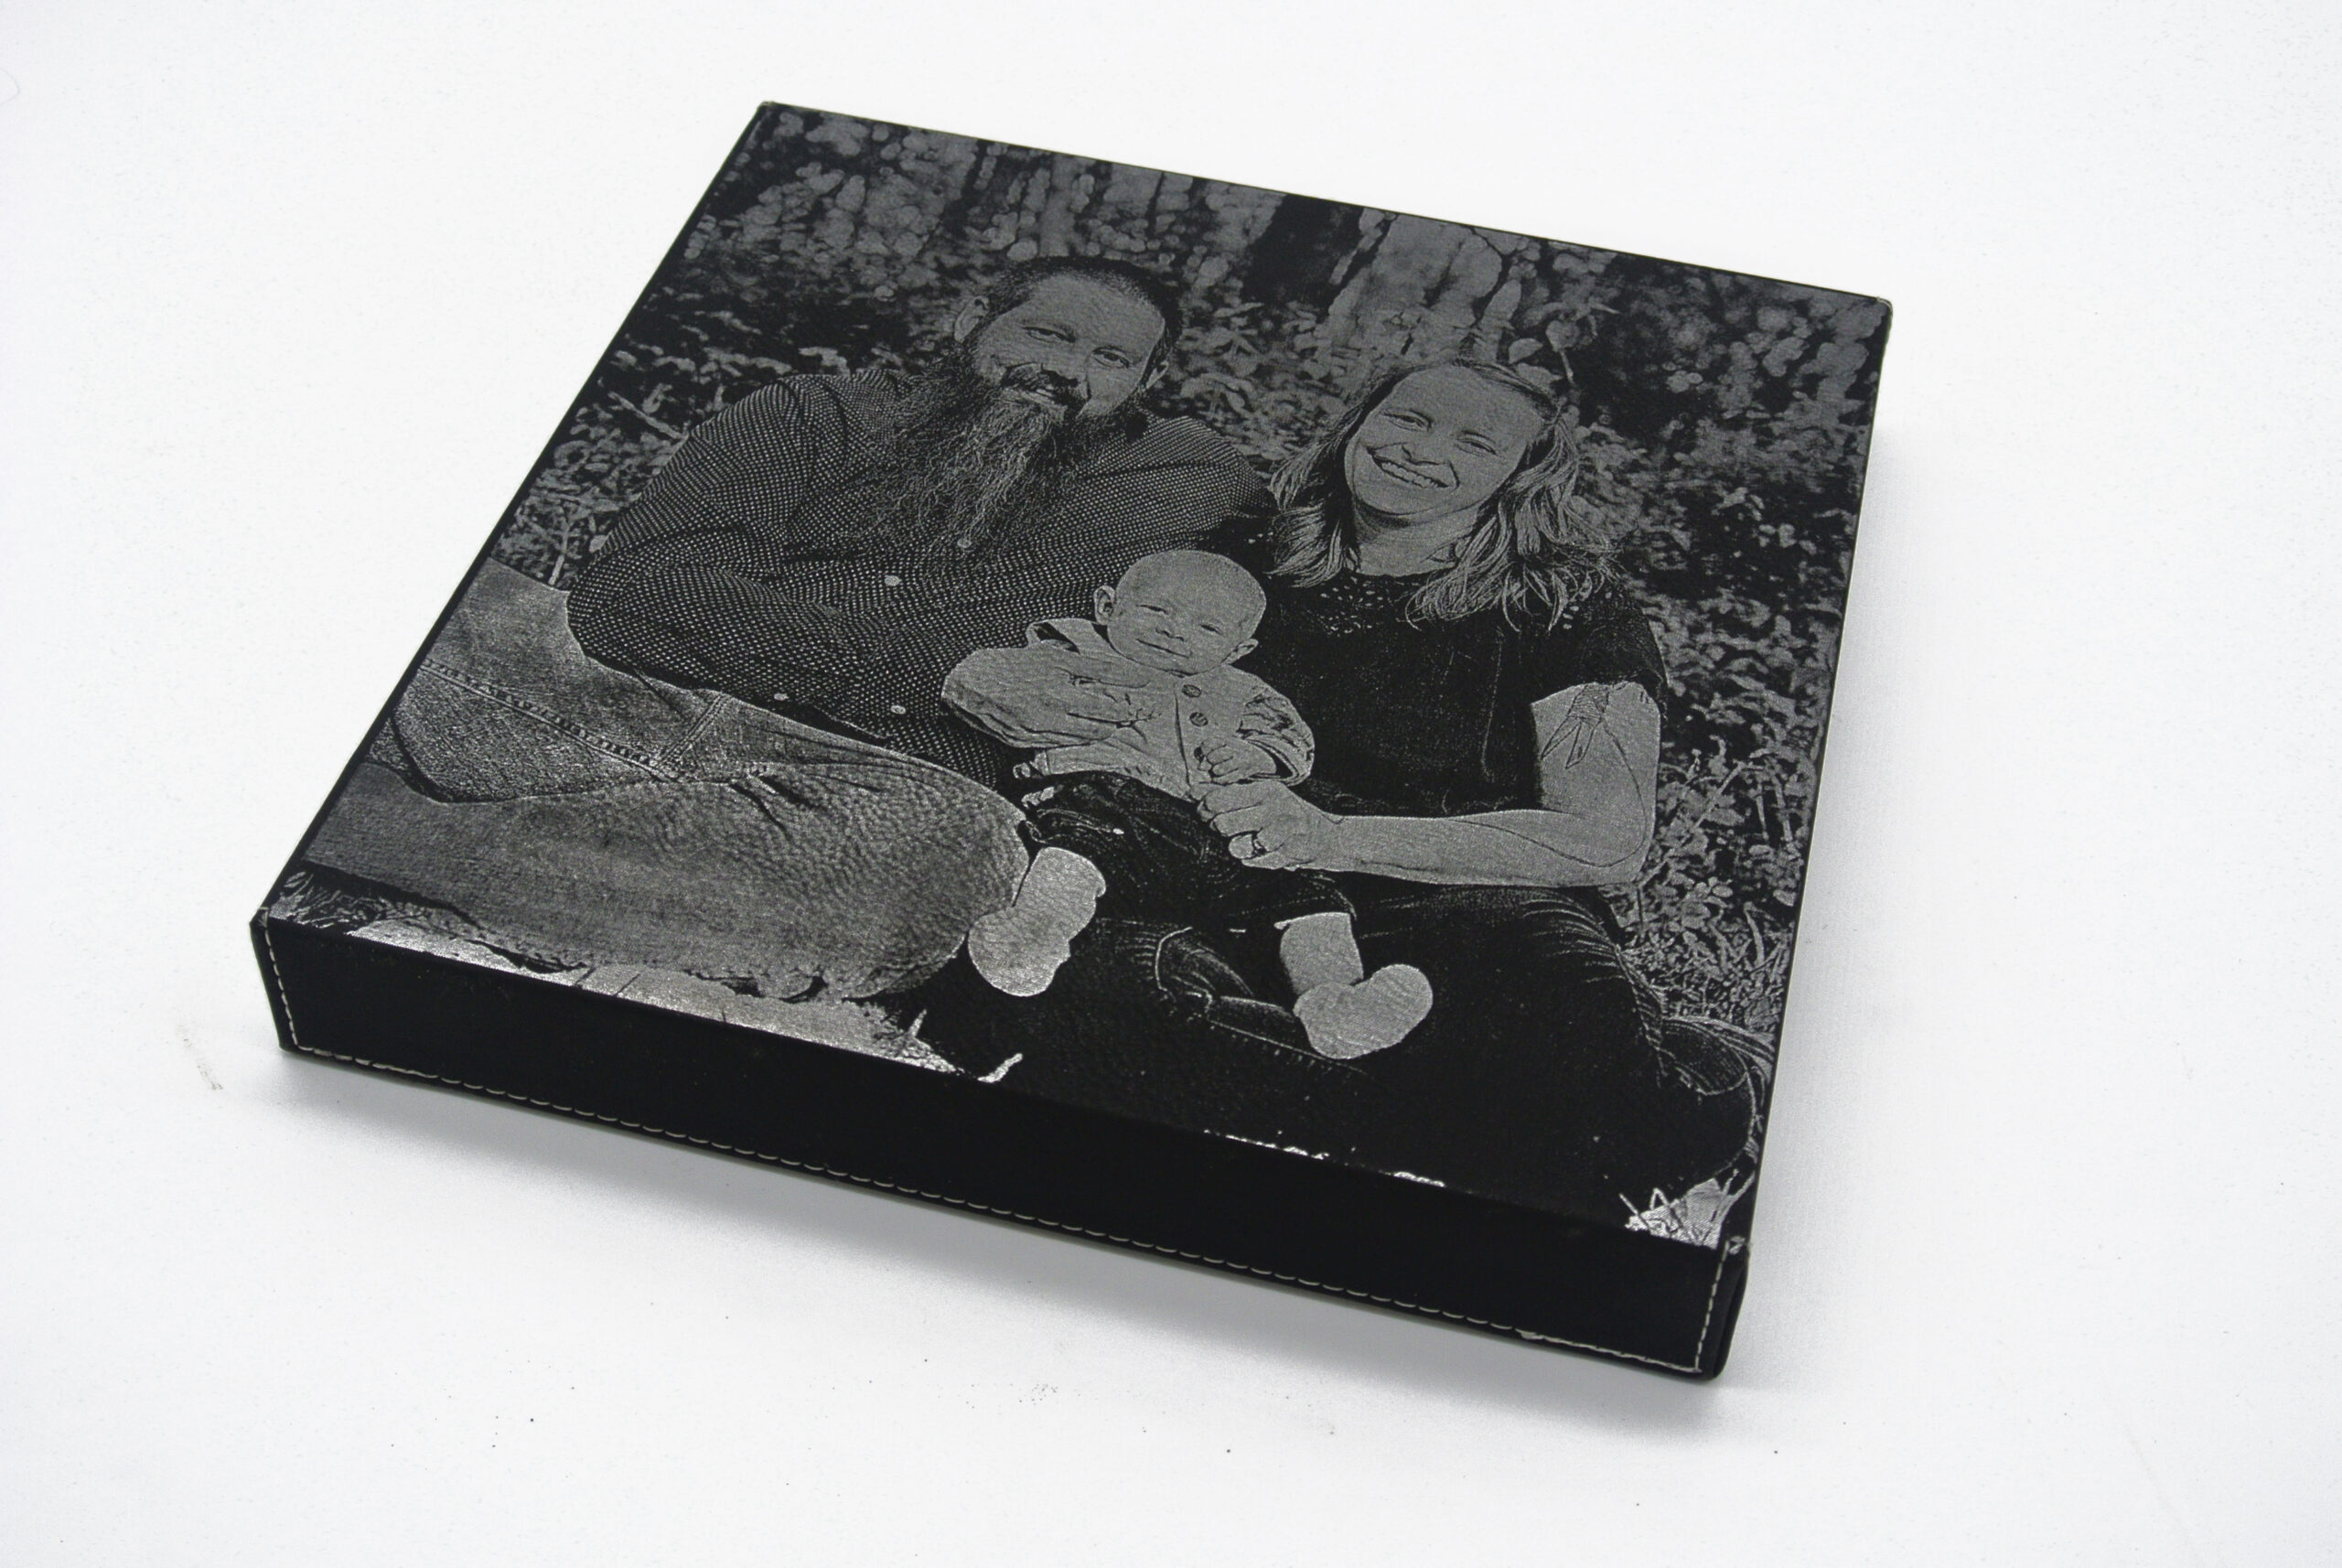 Example of photo engrave